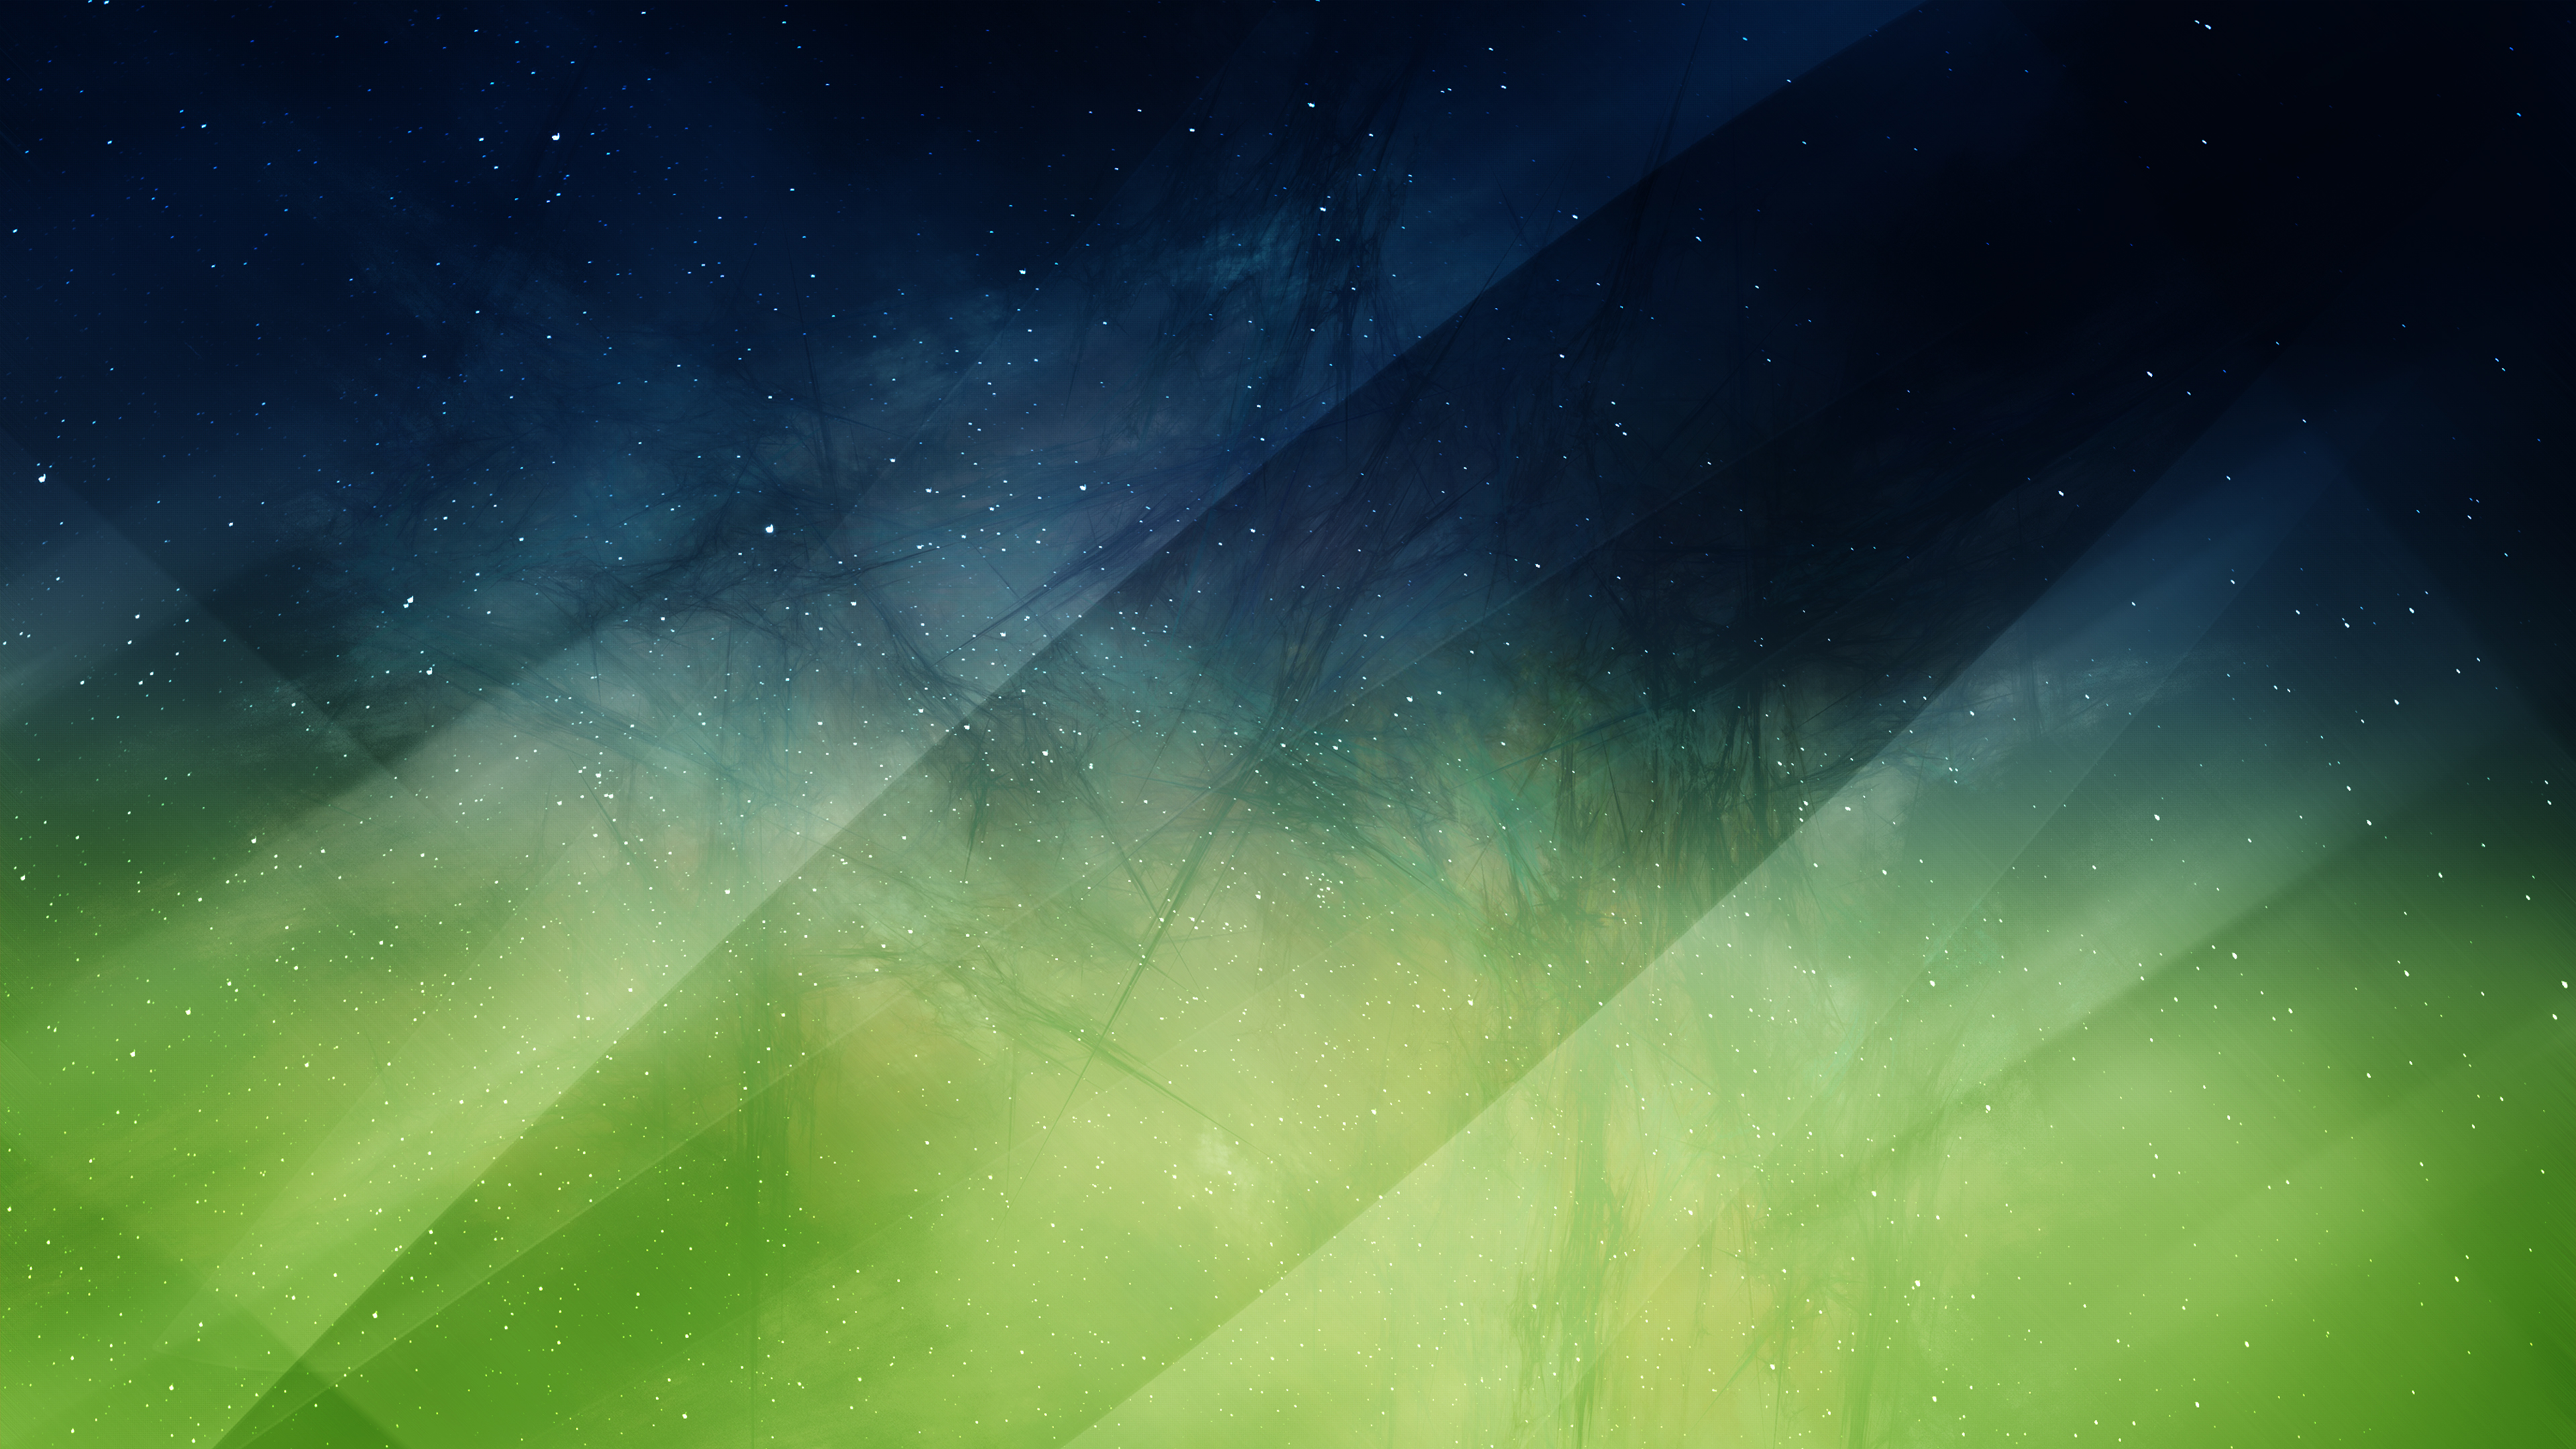 A toxic green shimmering abstract